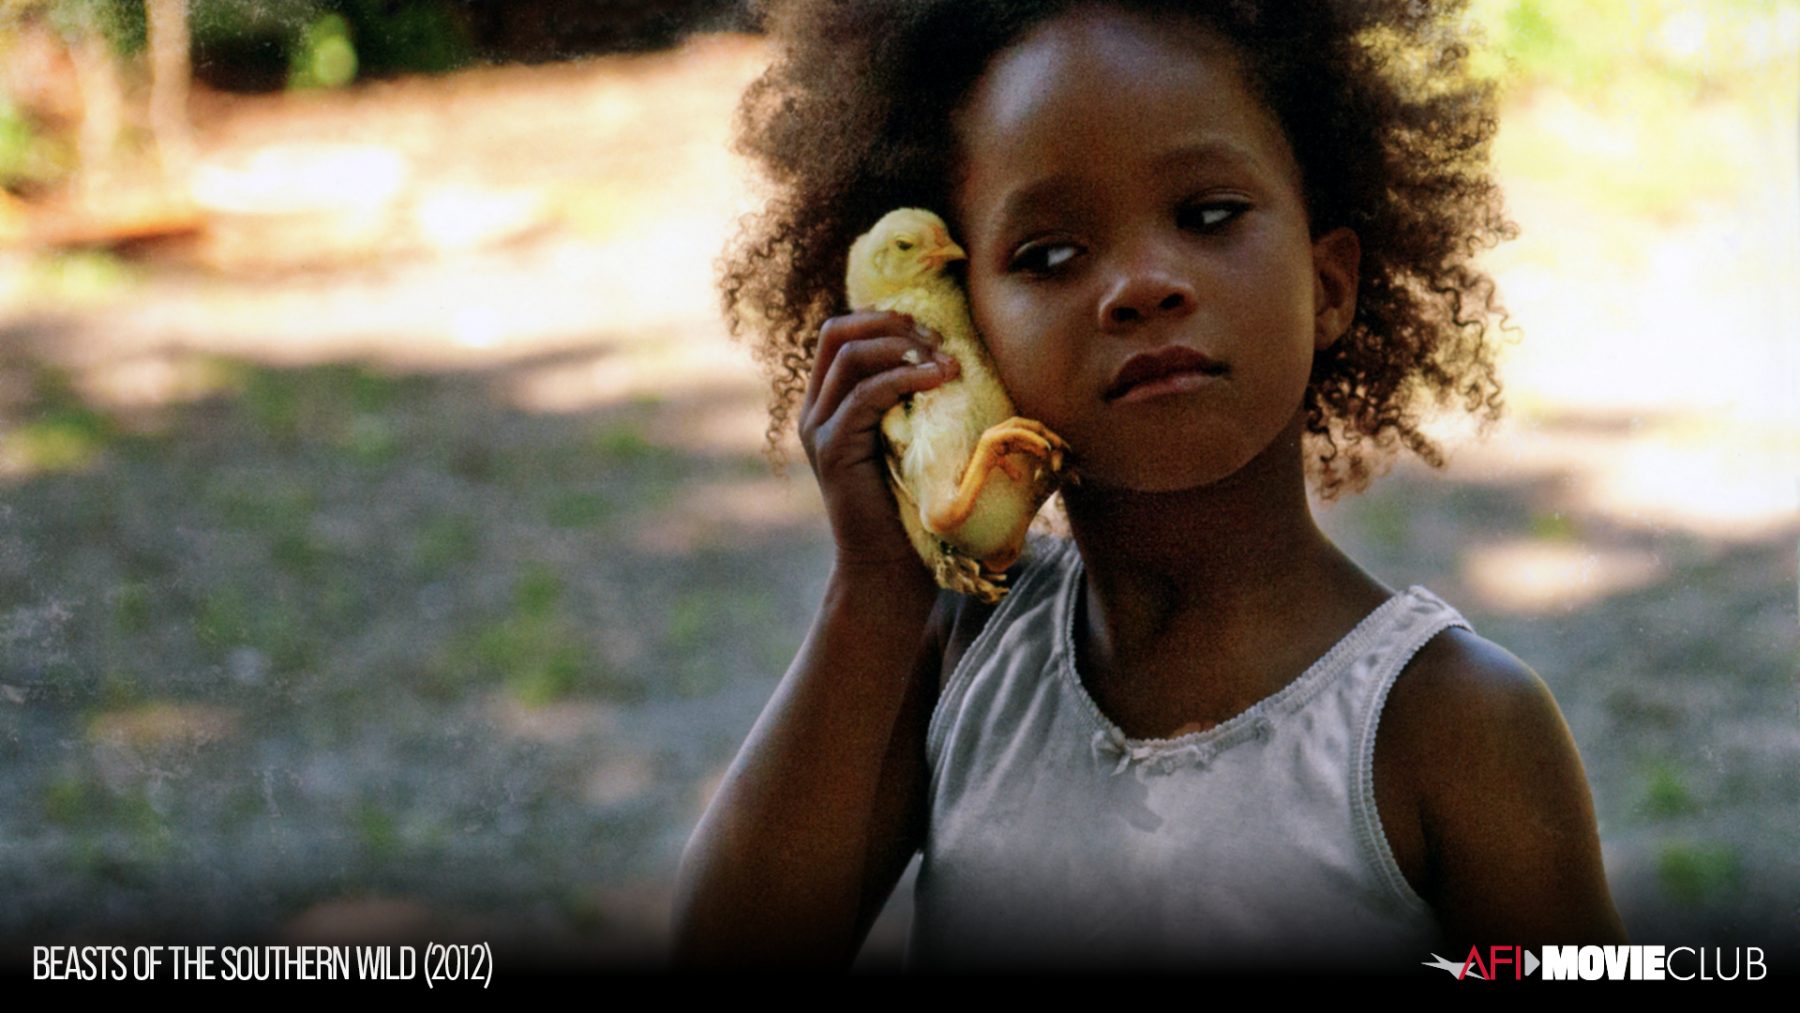 AFI Movie Club: BEASTS OF THE SOUTHERN WILD | American Film Institute